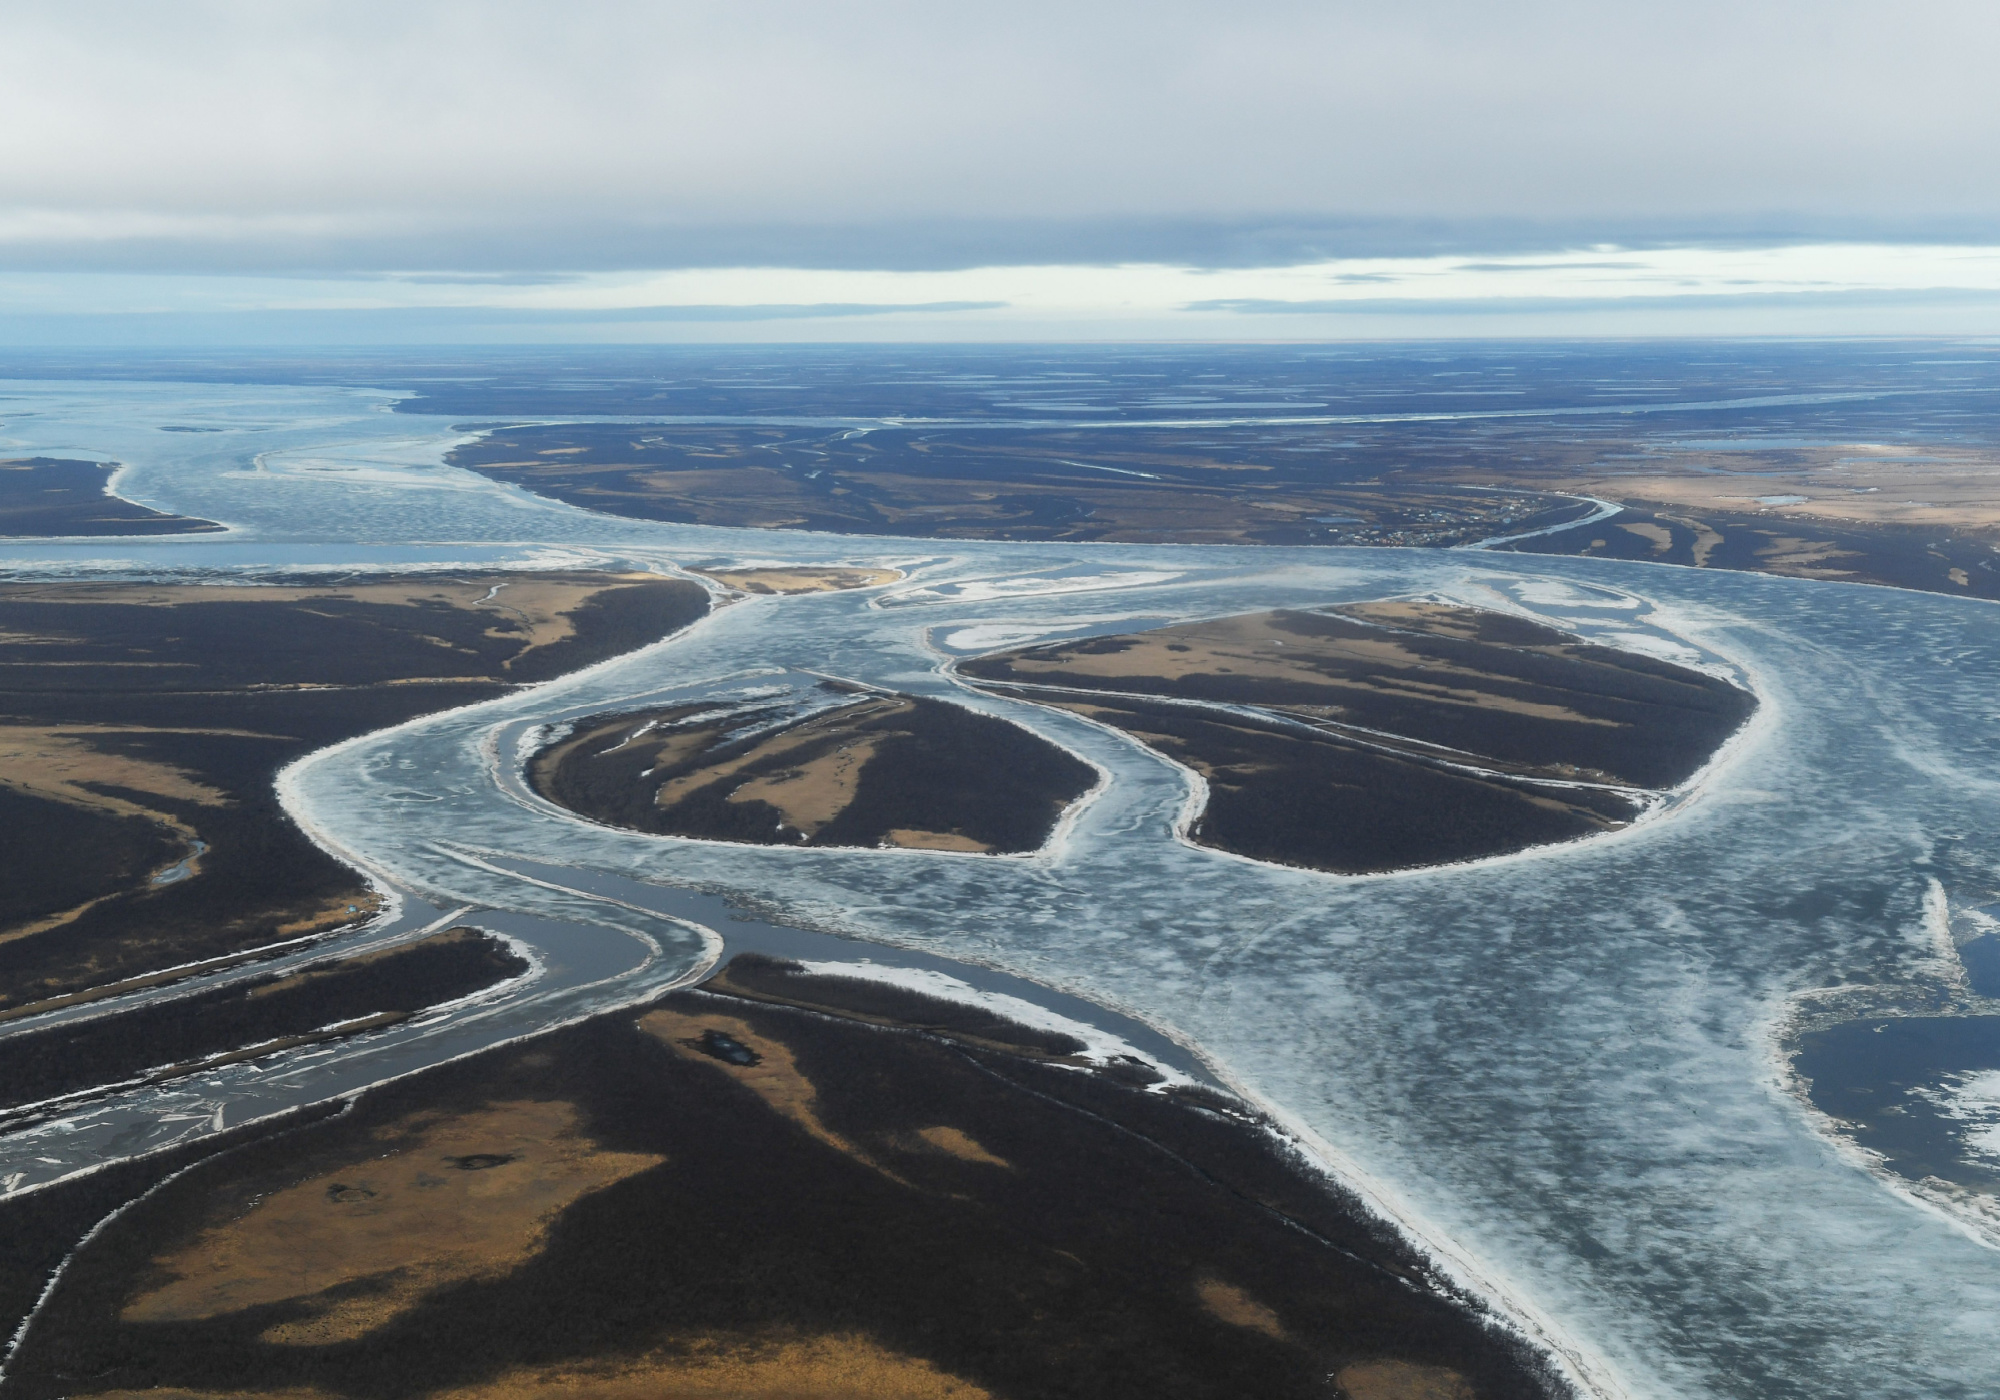 One missing moose hunter was found deceased on the Lower Kuskokwim River on Friday, Sept. 9 and a separate trio are still missing in the same area.